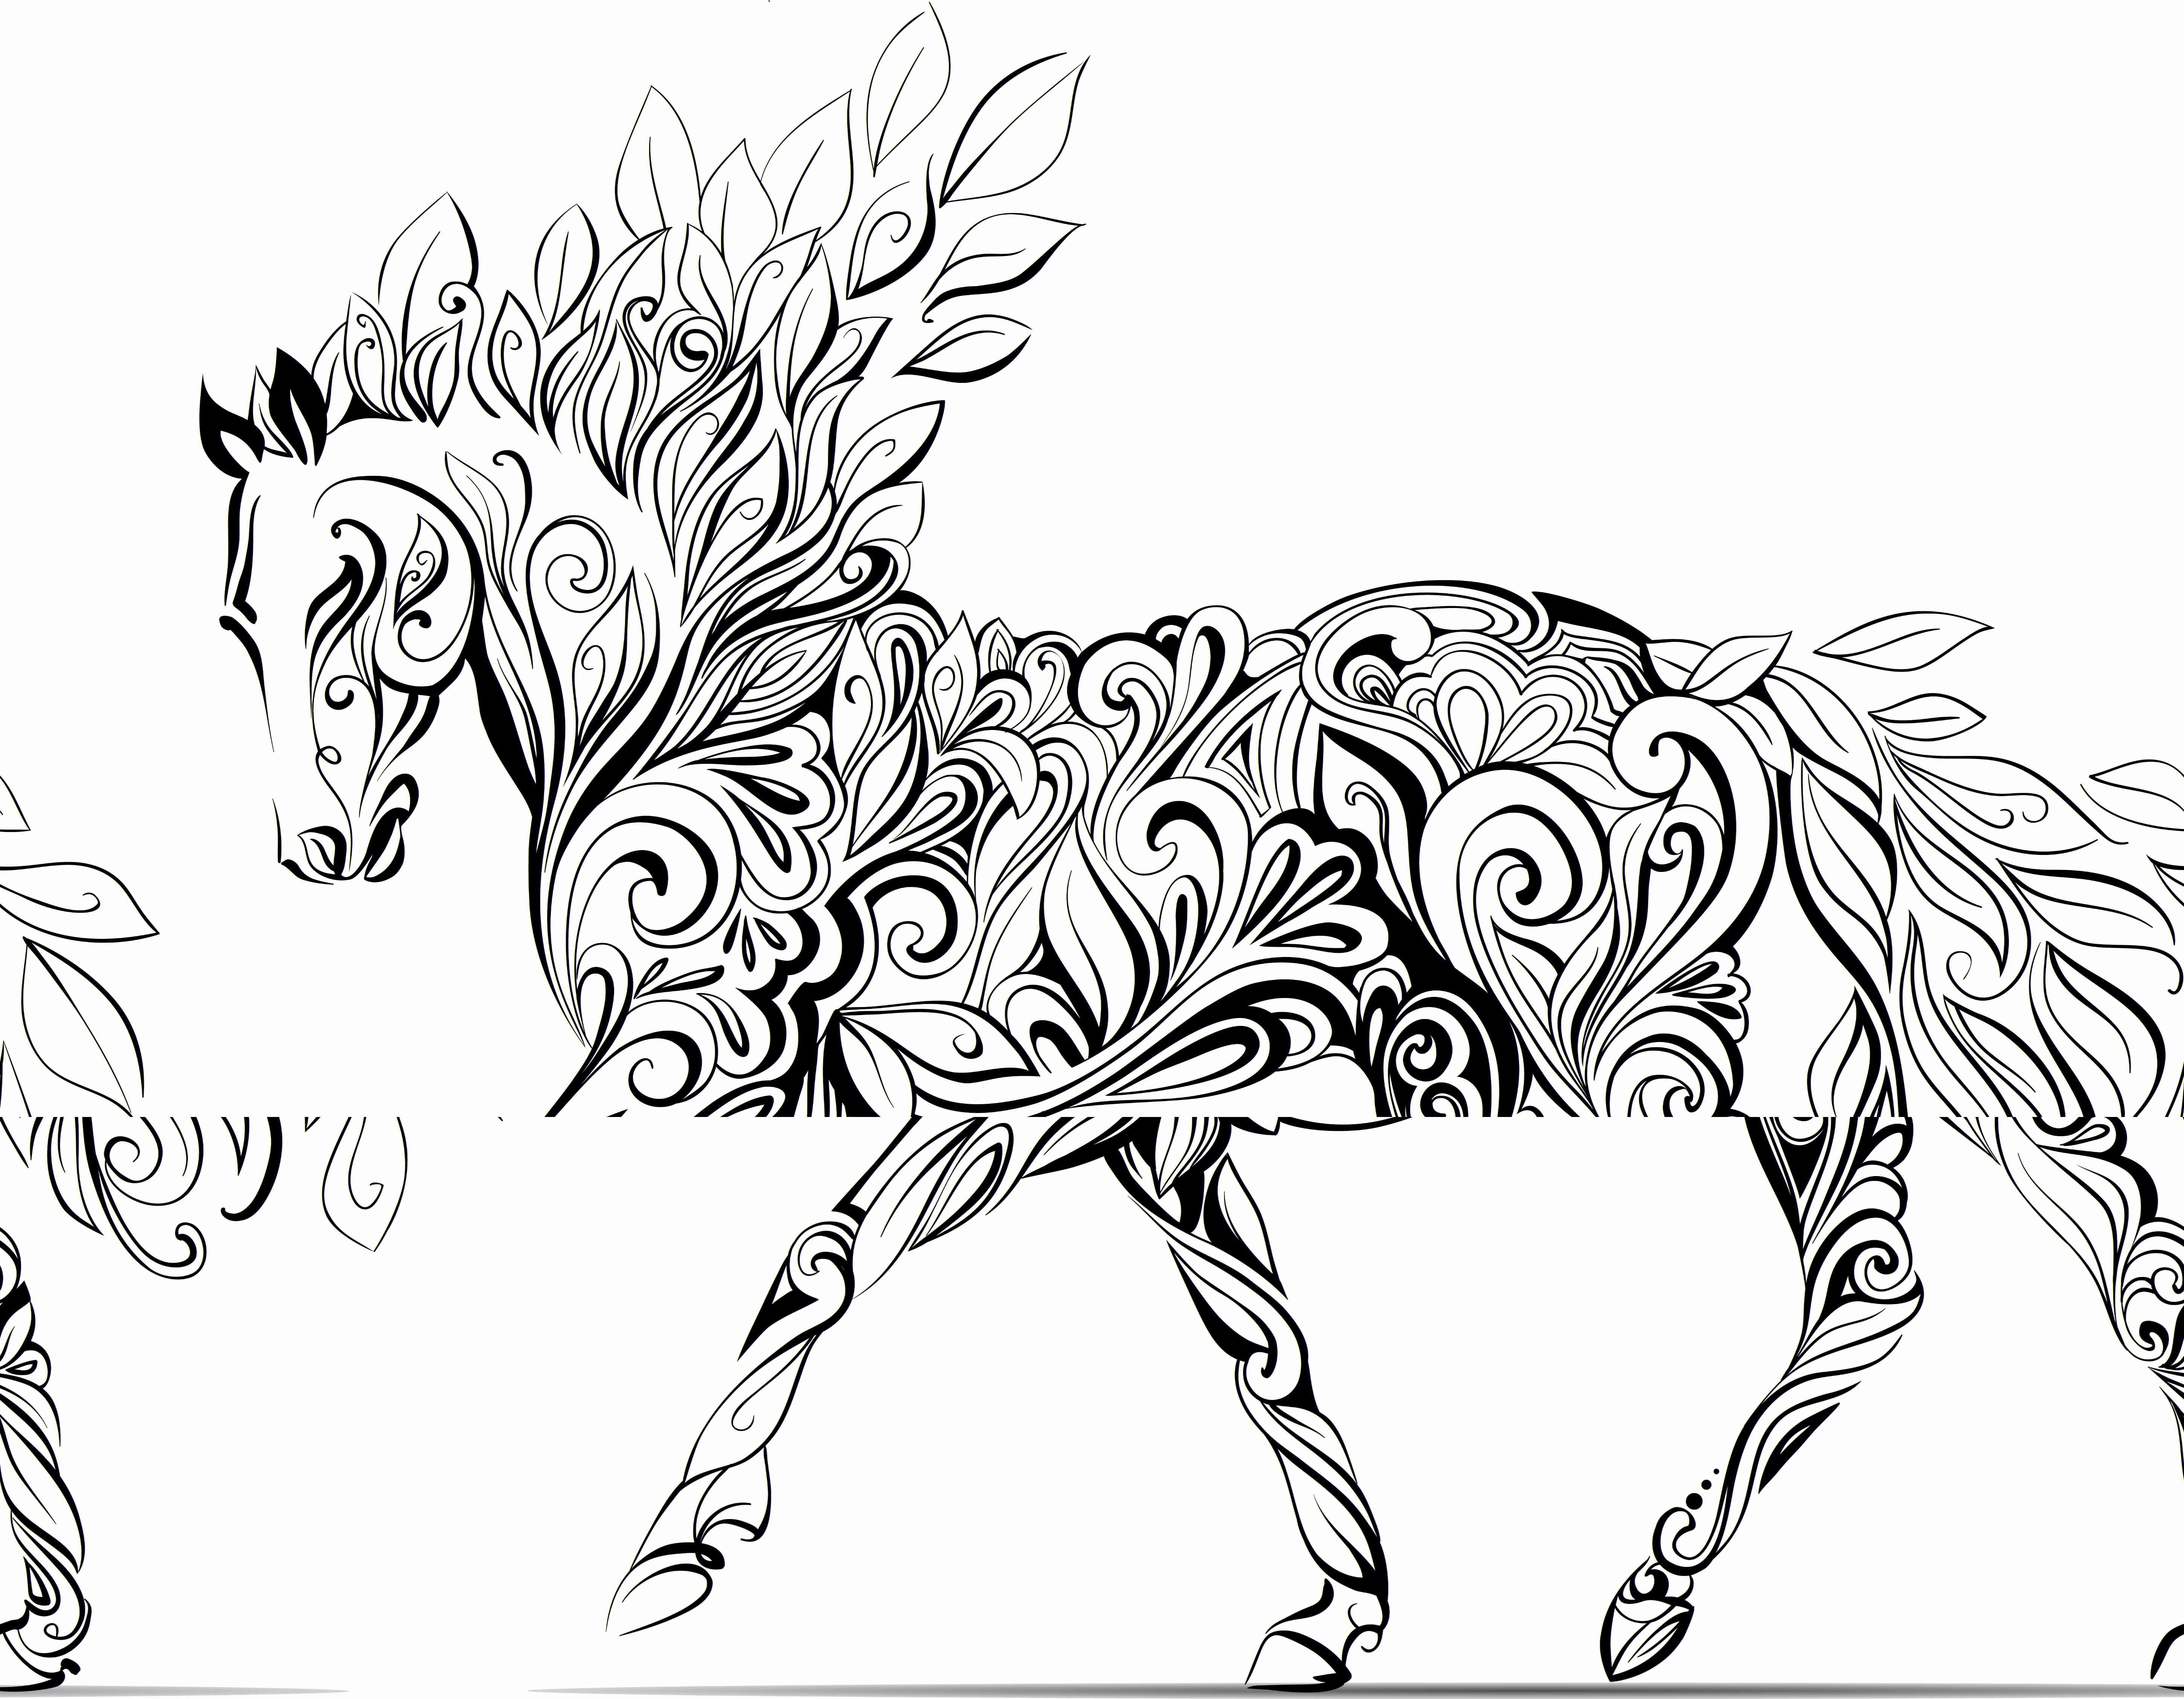 Unicorn Coloring Pages for Adults New Coloringpages Fresh Fresh S S Media Cache Ak0 Pinimg originals 0d